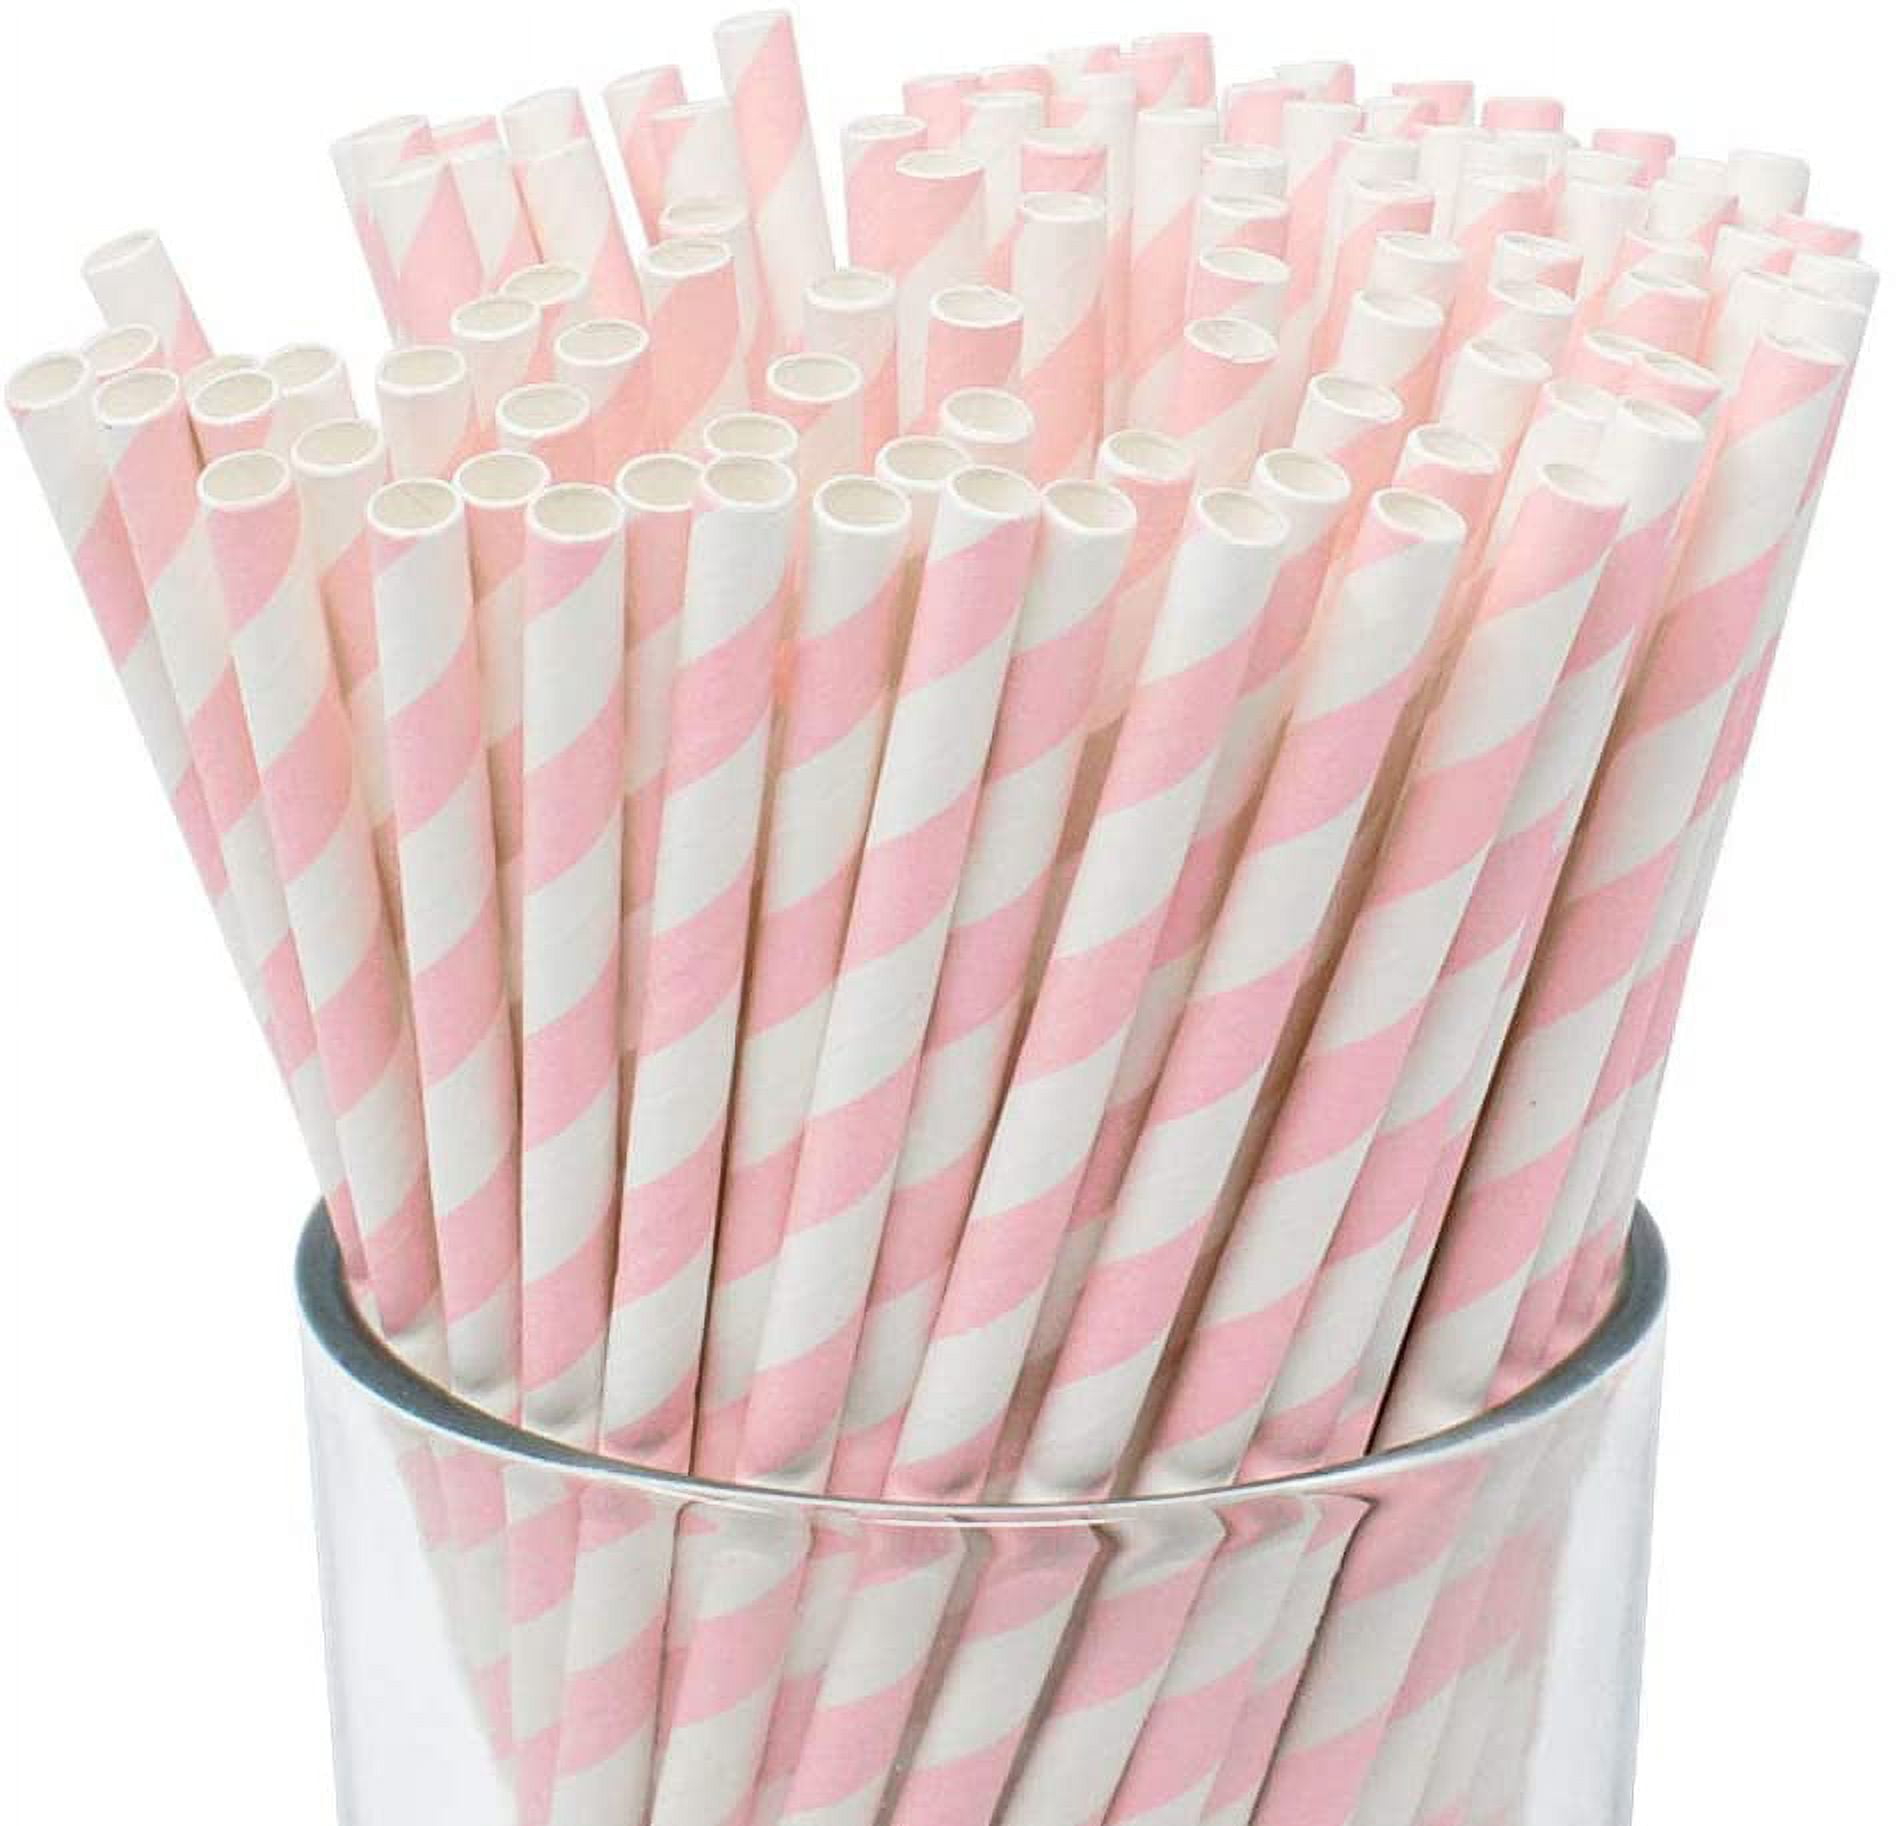 100pcs Stainless Steel Drinking Straw Wholesale Reusable Straw